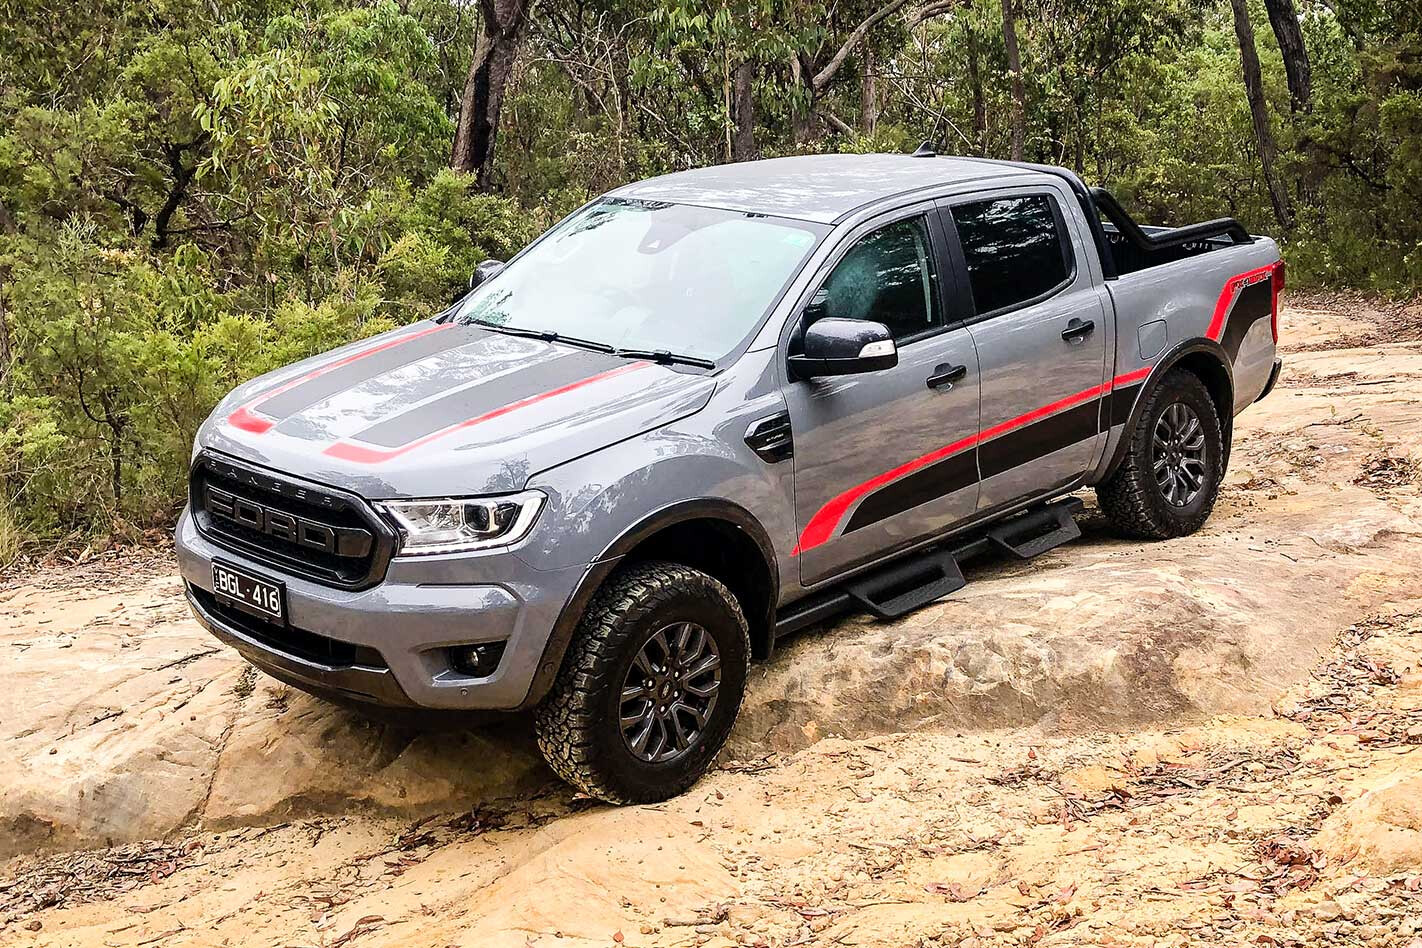 Ford Ranger FX4 MAX off-road review